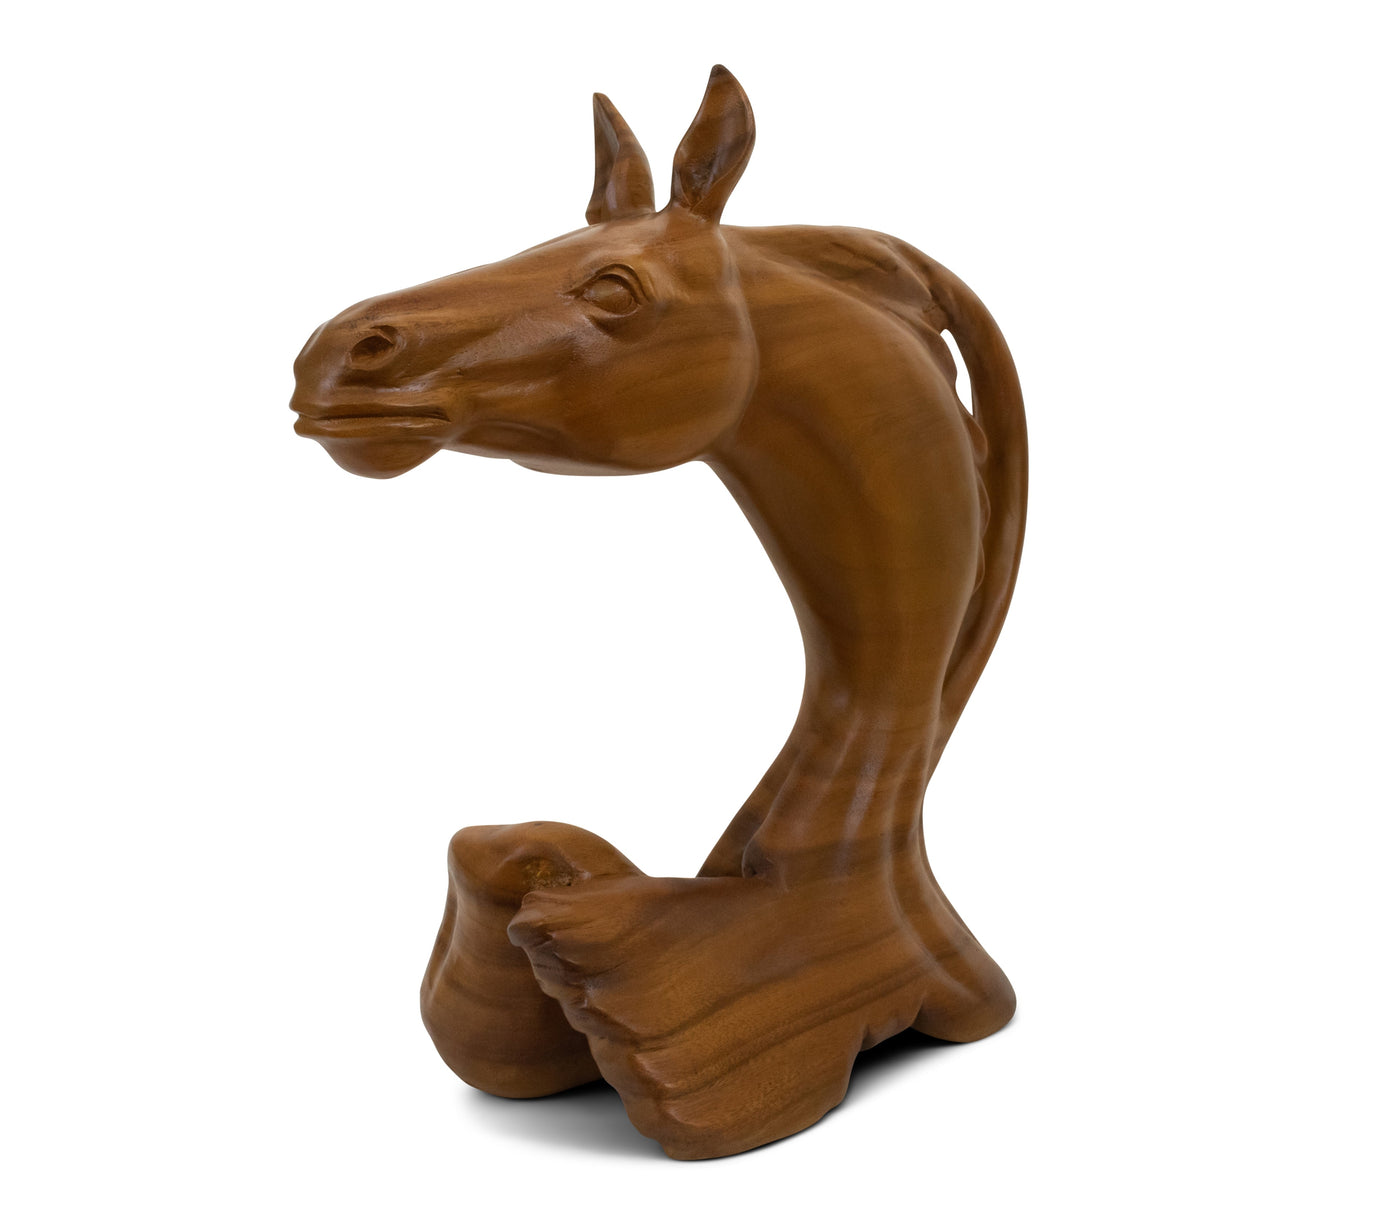 Wooden Solid Hand Carved Horse Head Abstract Sculpture Art Statue Handcrafted Handmade Decorative Home Decor Accent Wood Decoration